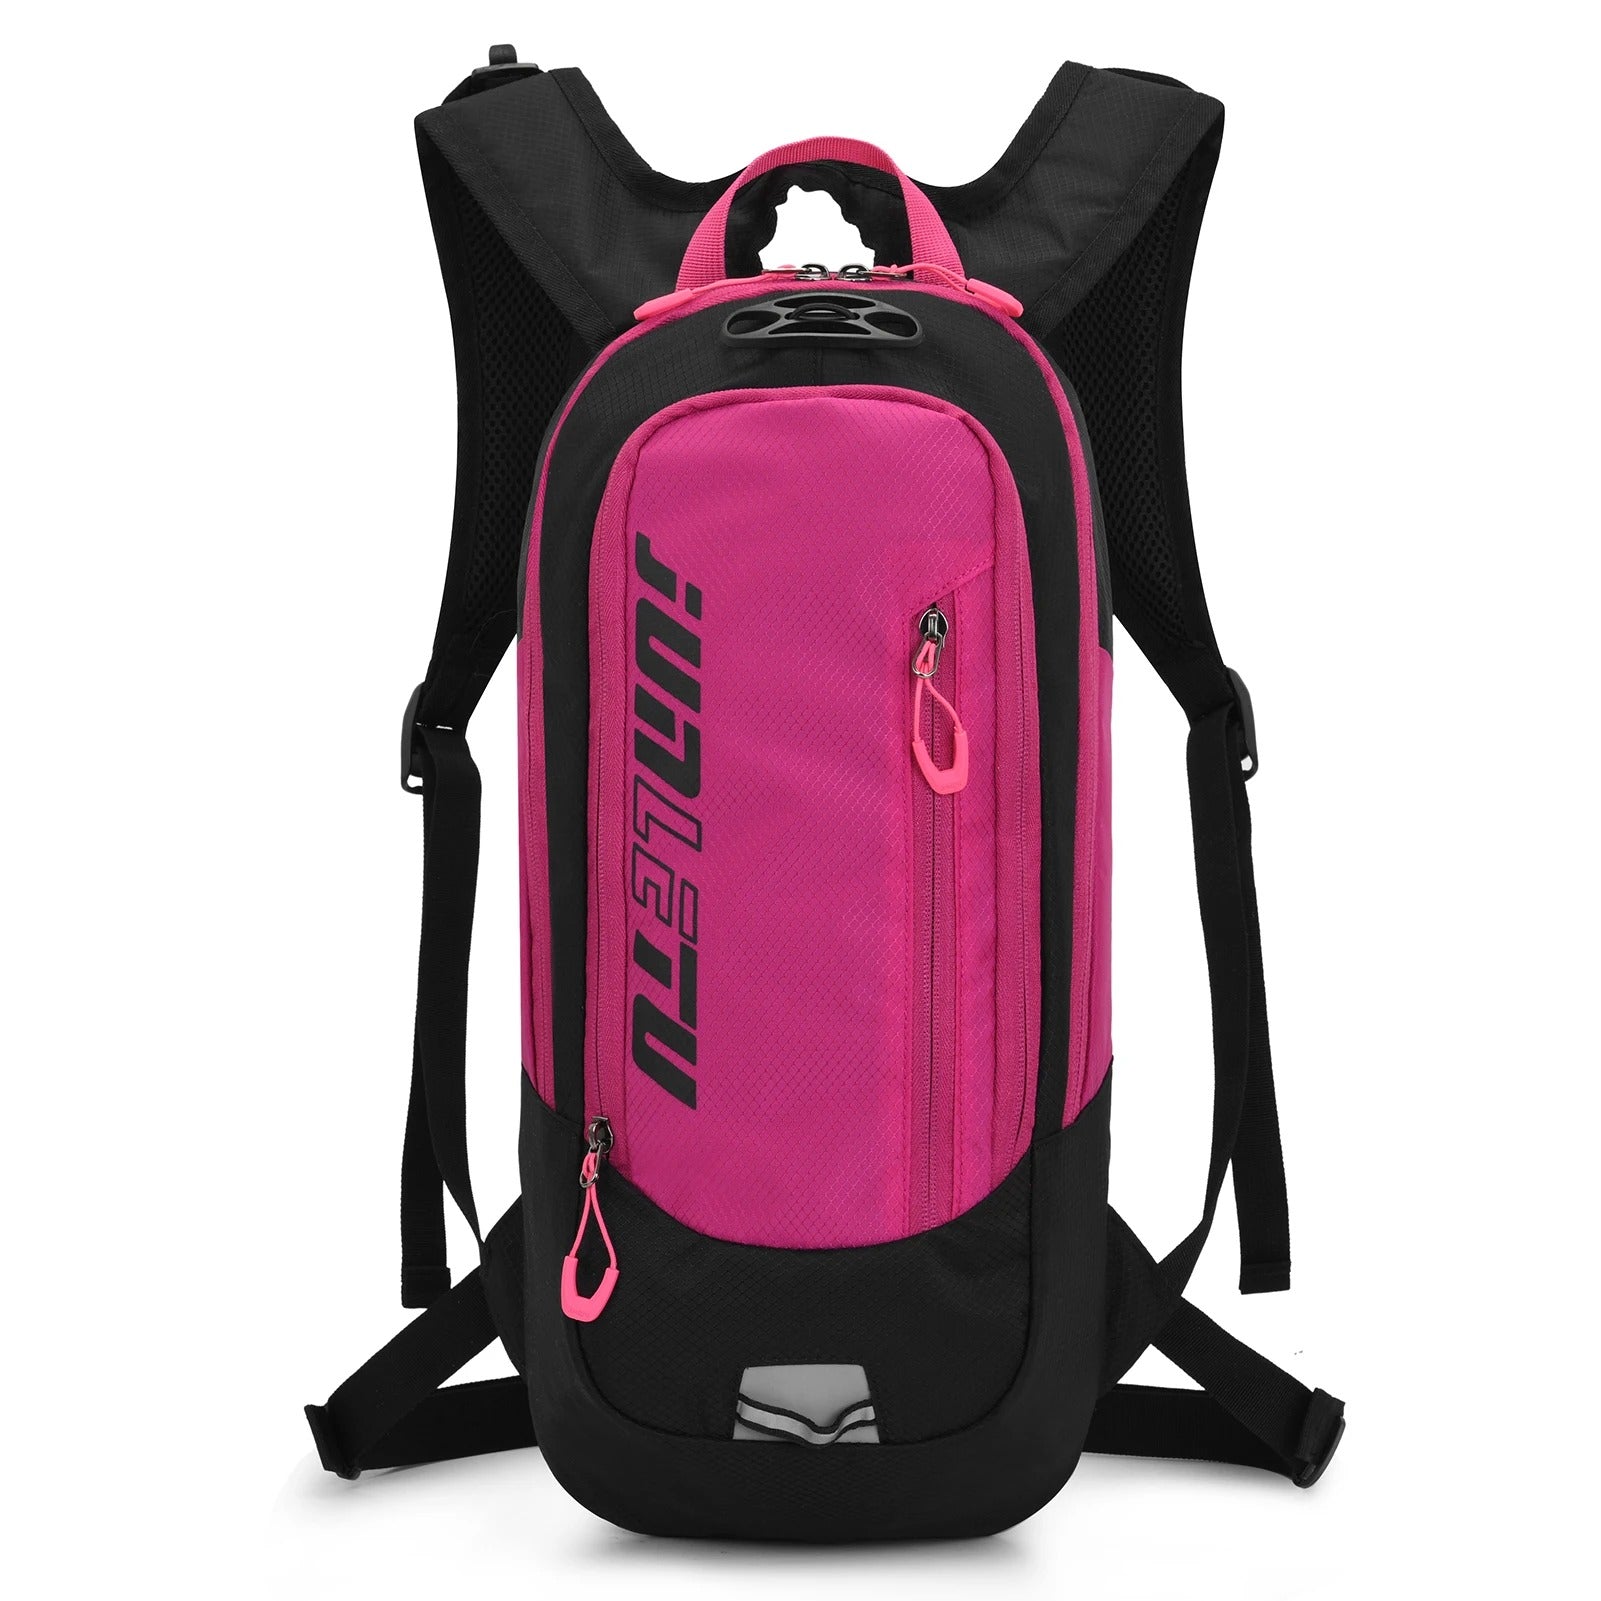 10L Cycling Backpack - Rose red